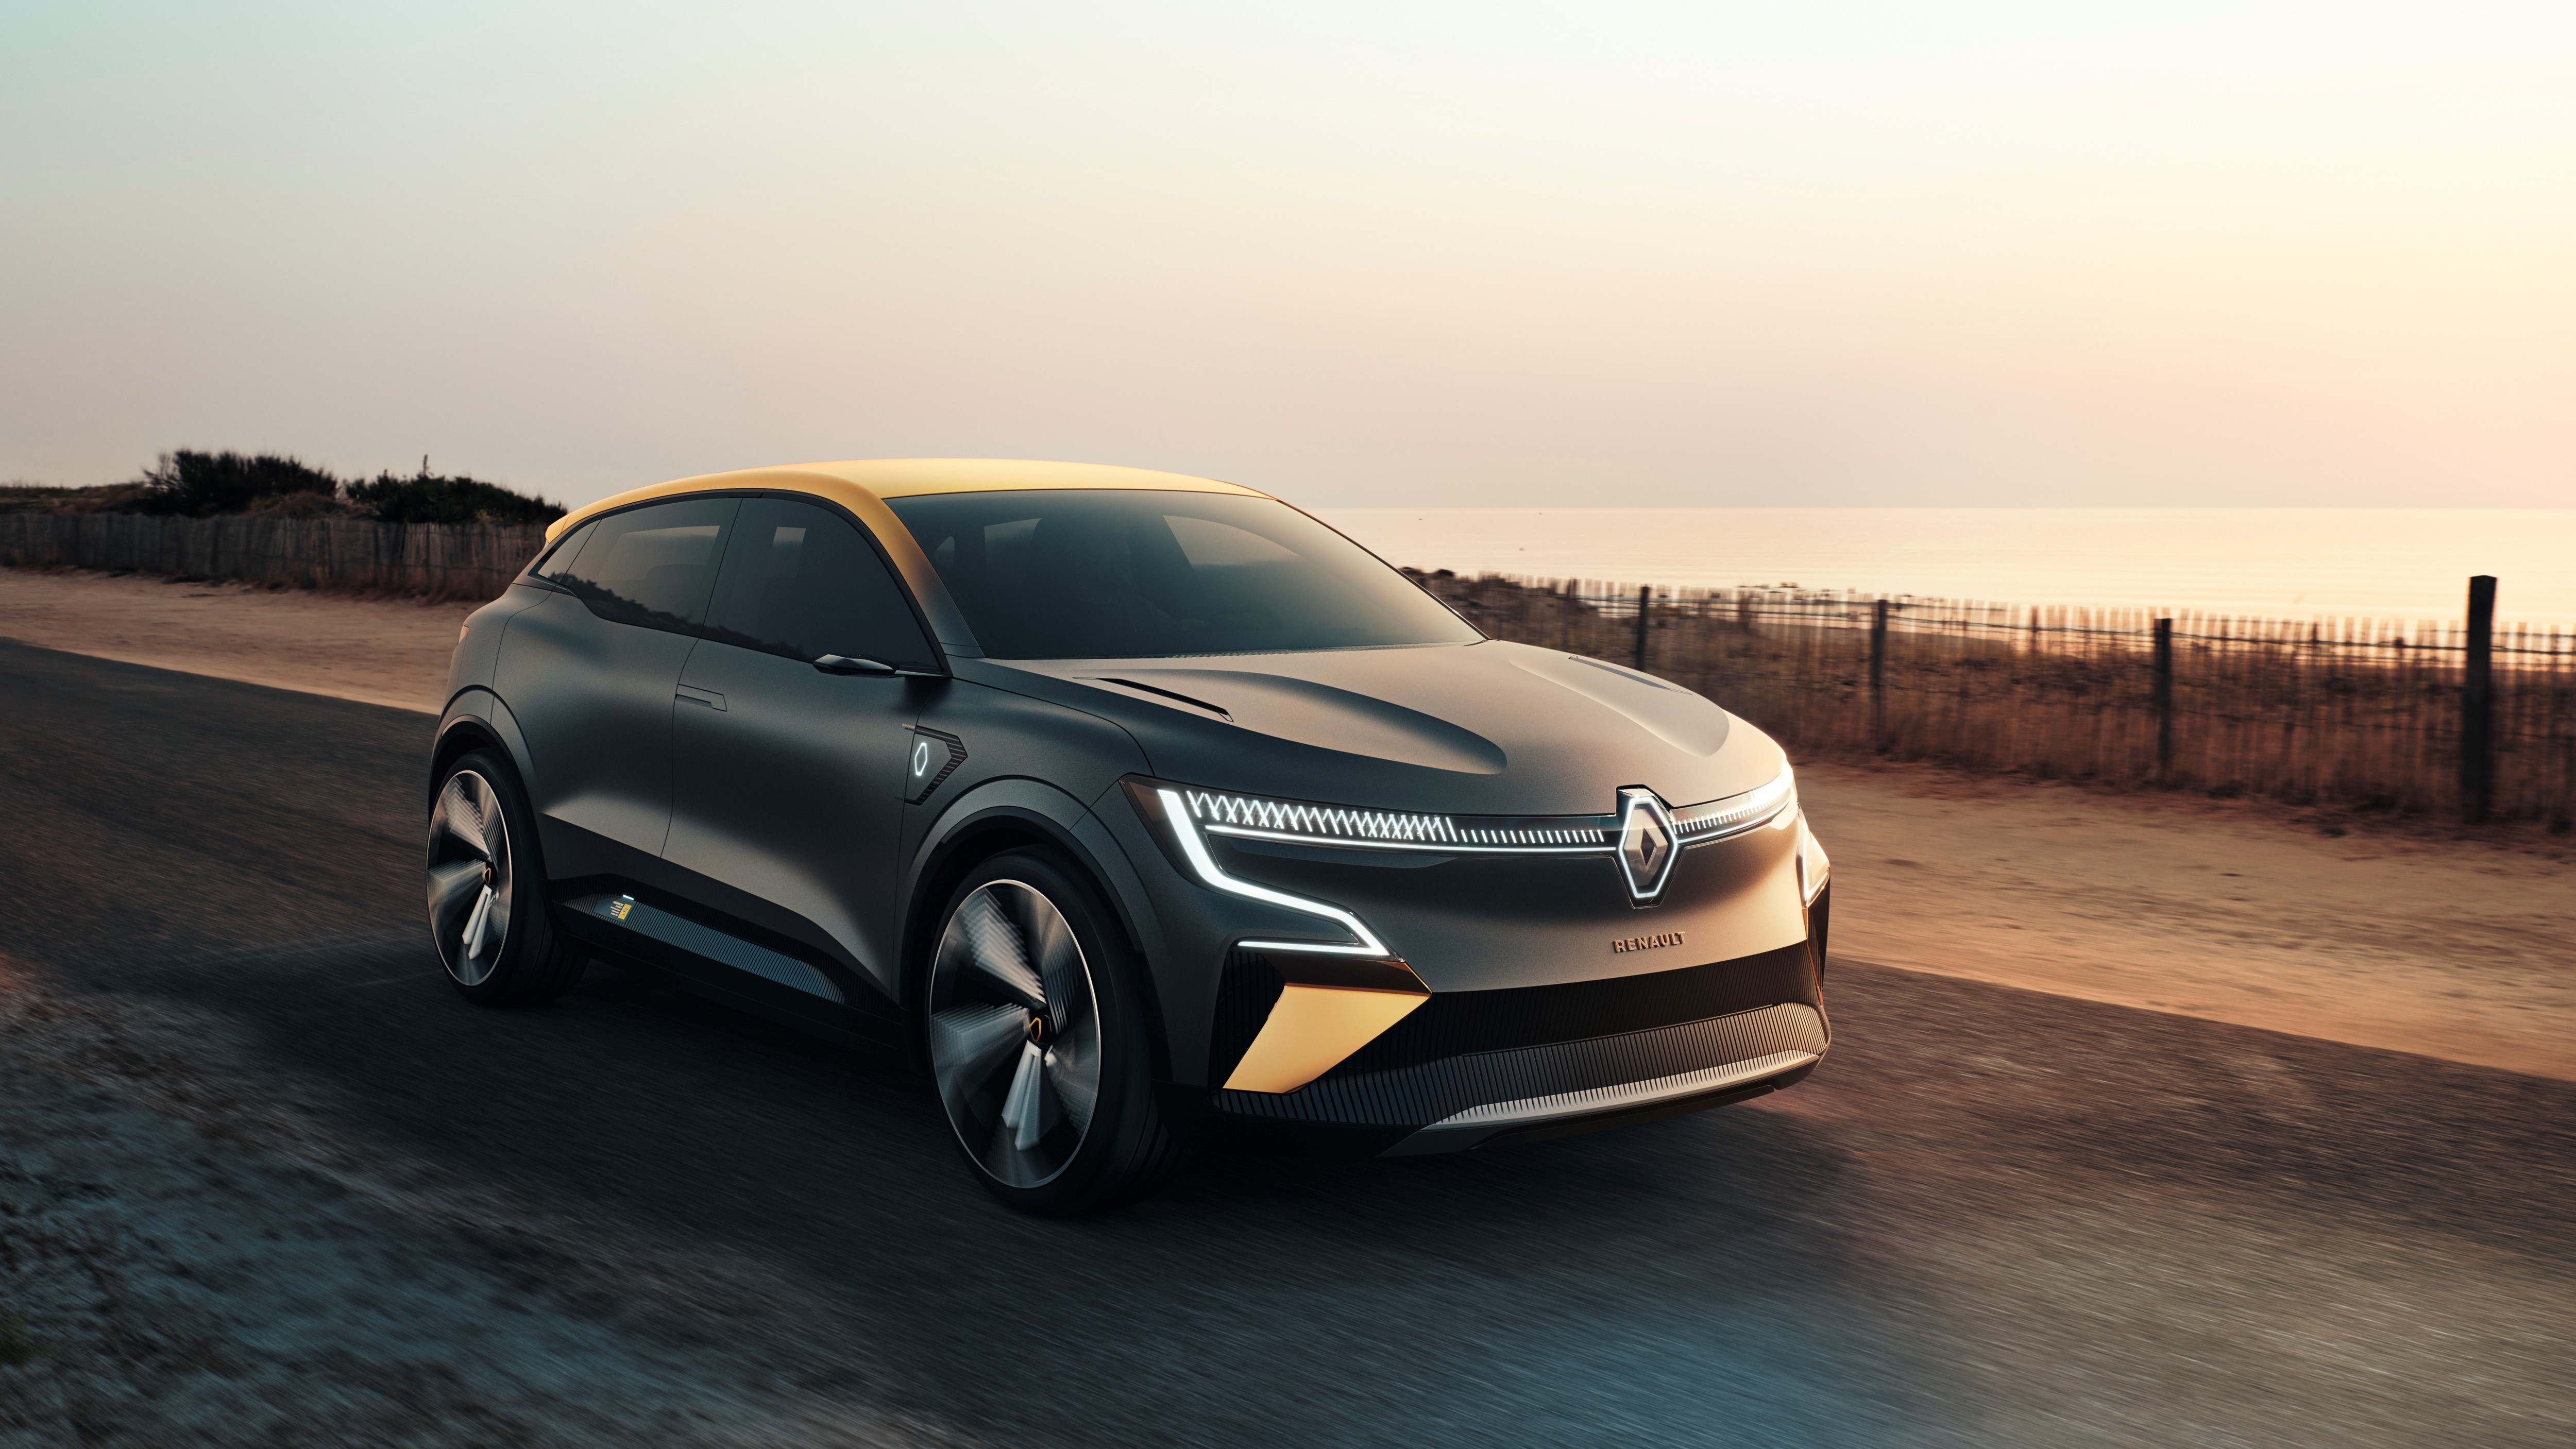 Renault Megane goes electric and Dacia to launch 'most affordable EV